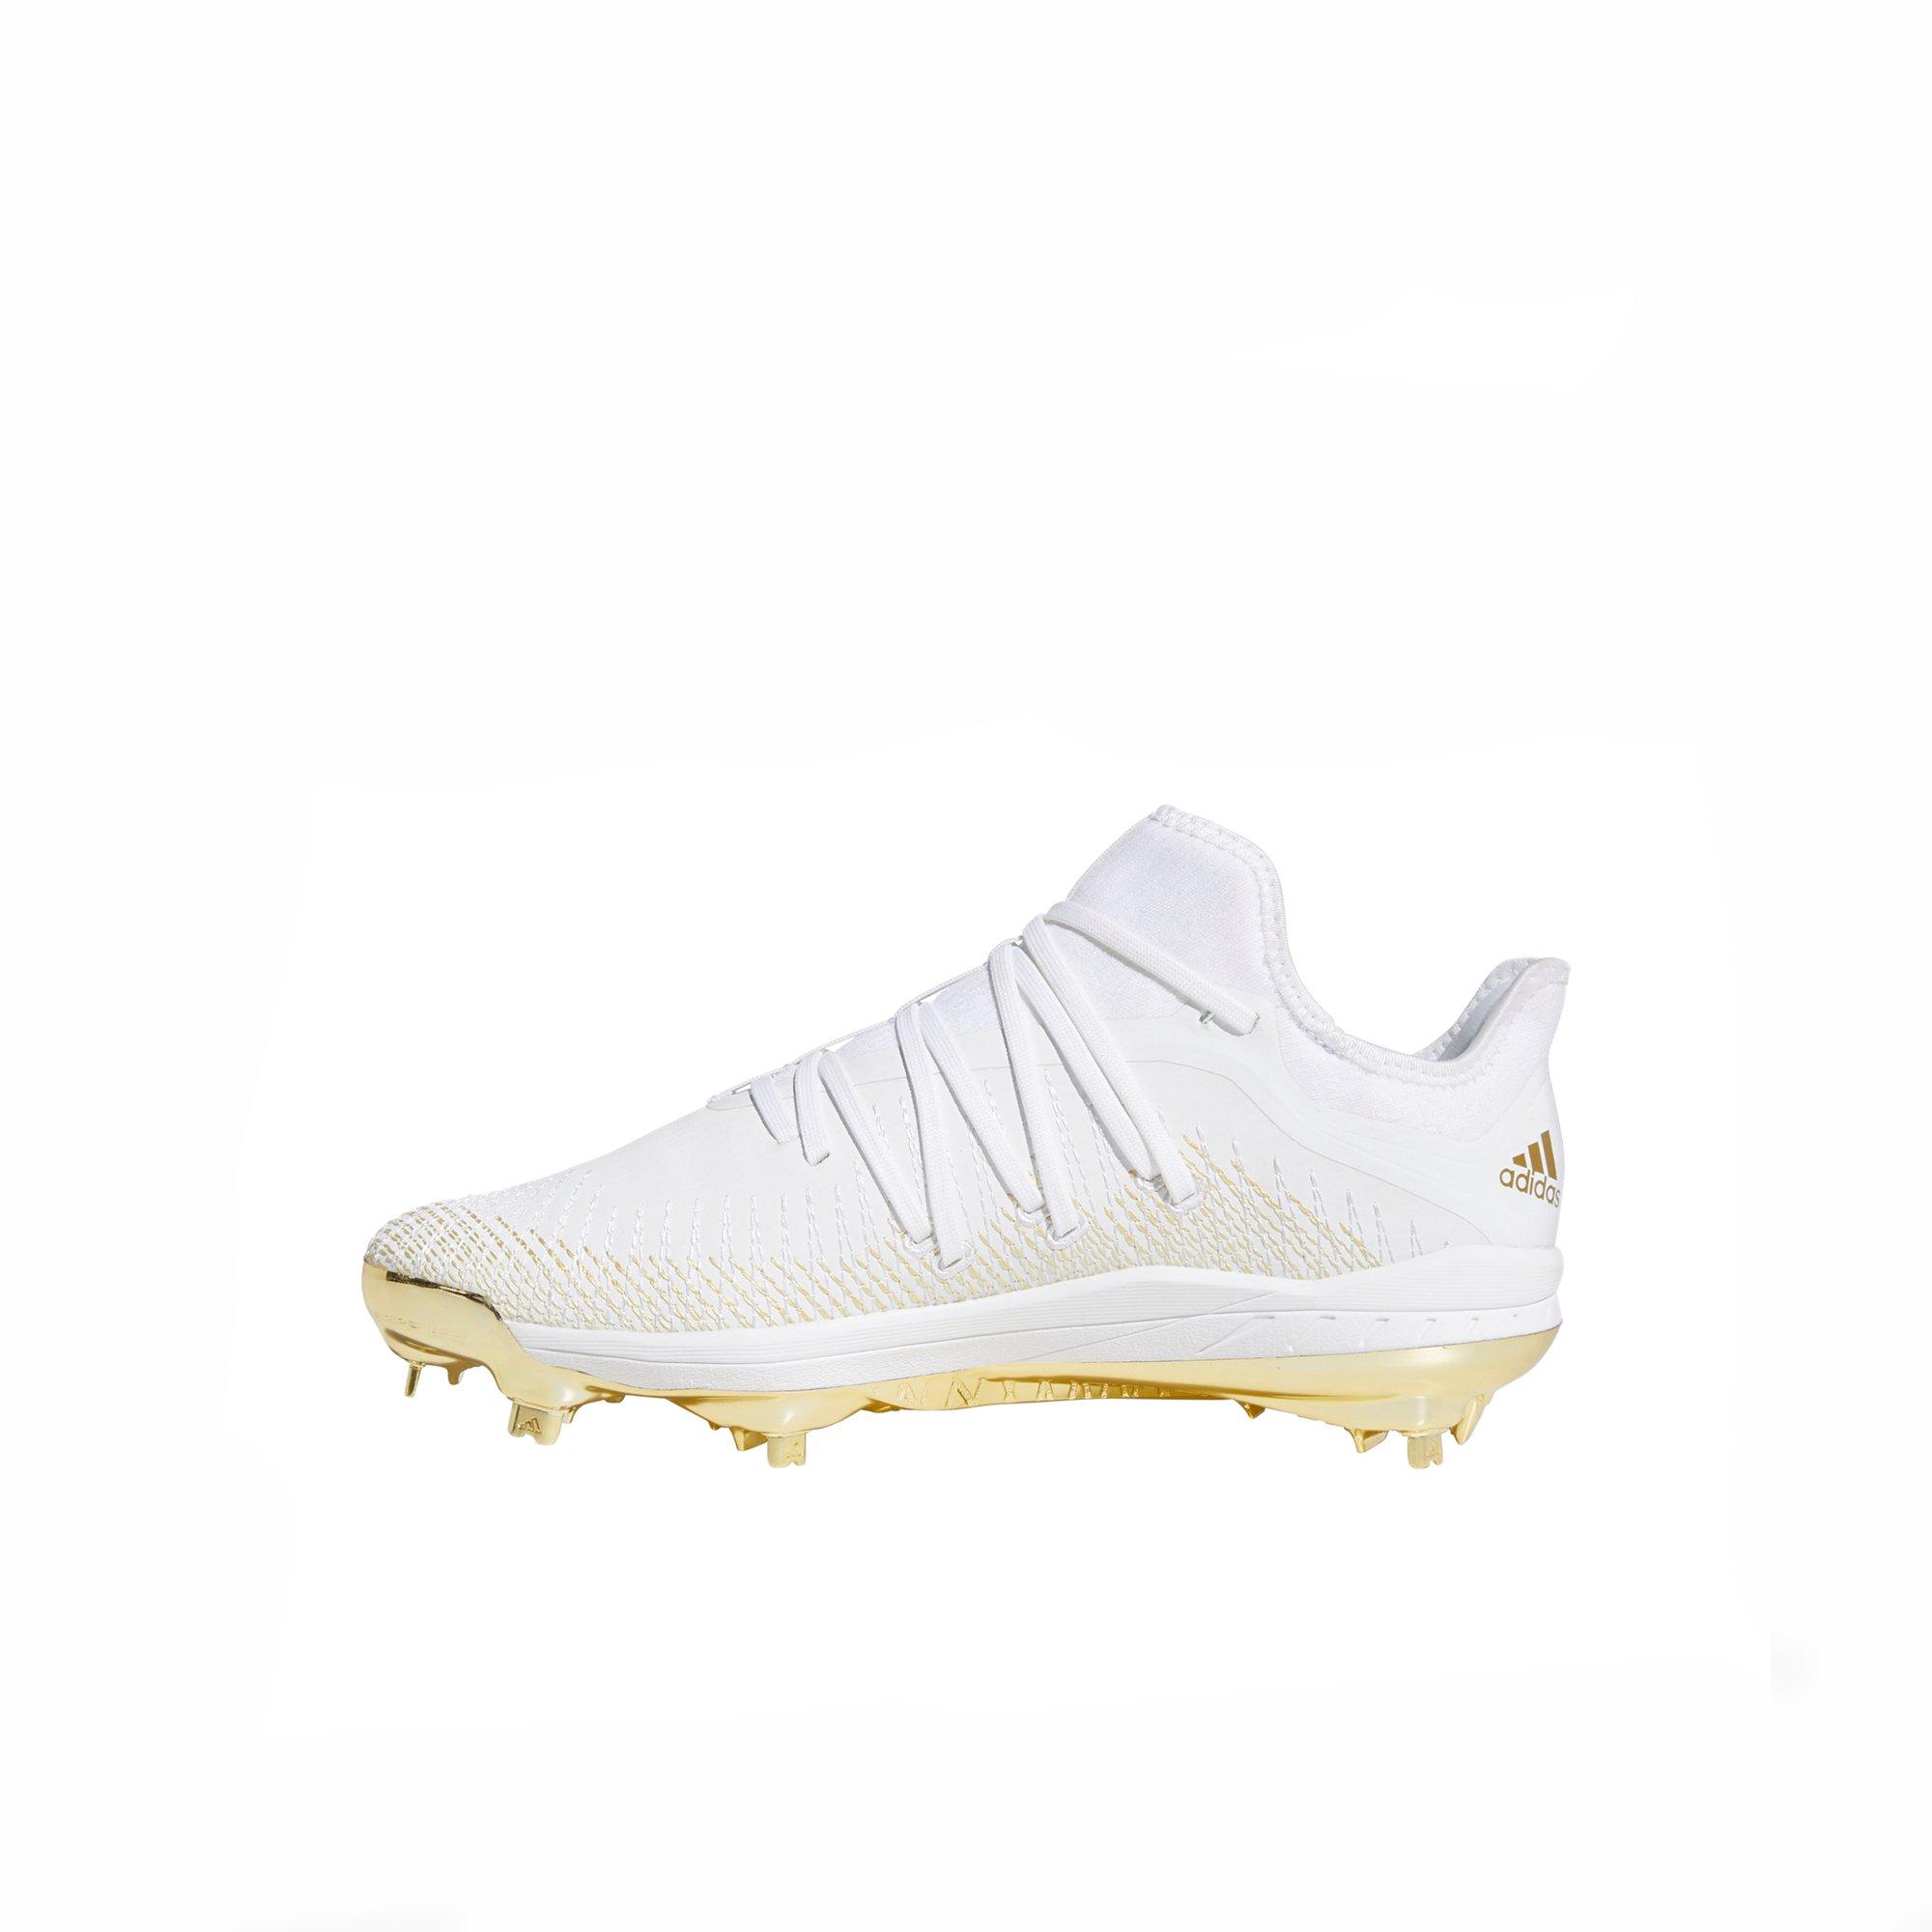 navy blue and gold baseball cleats